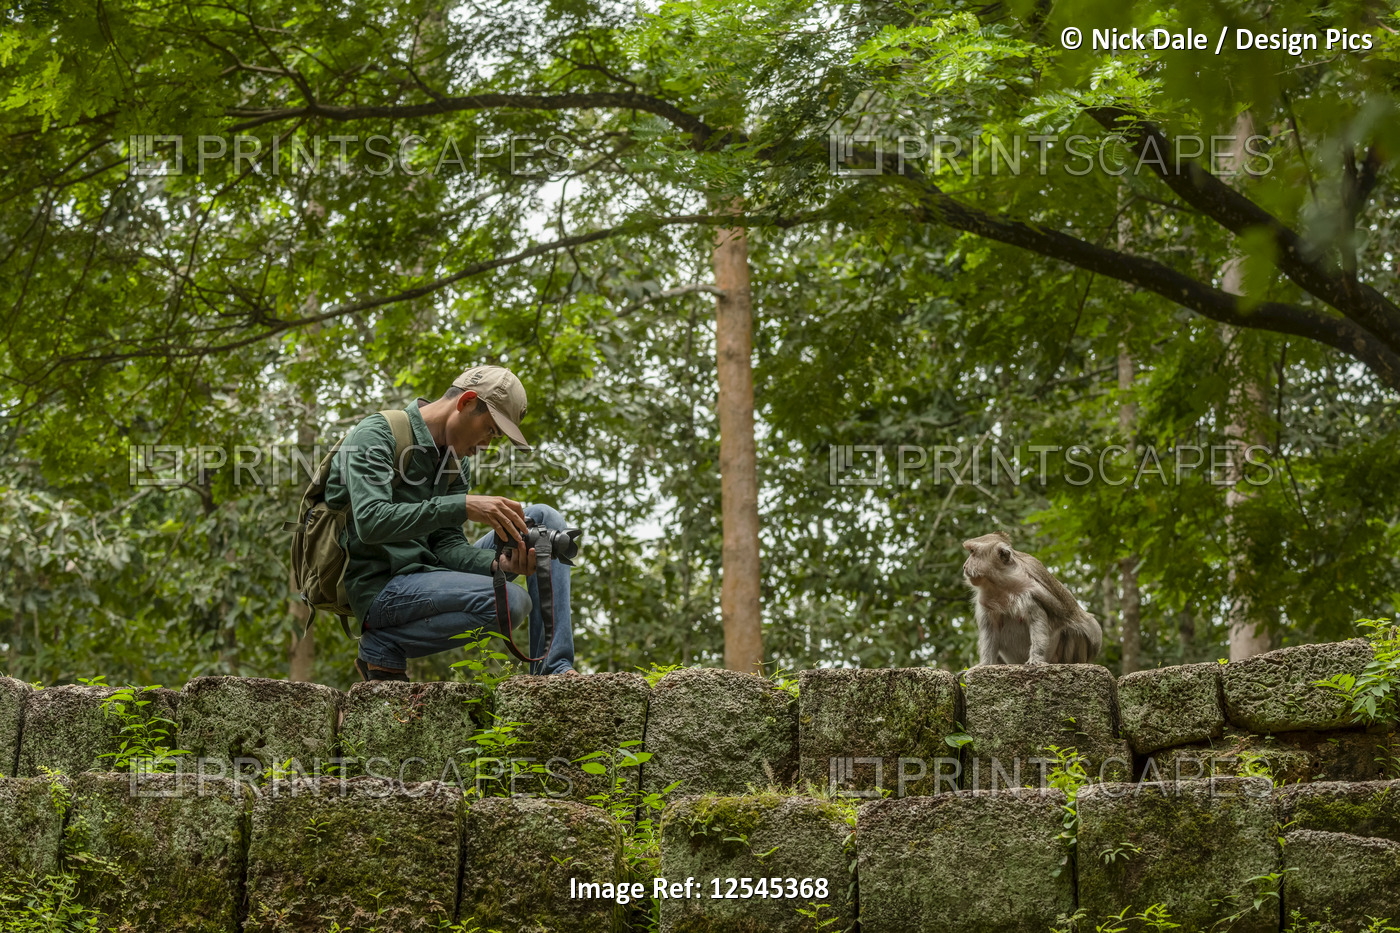 Tourist photographs long-tailed macaque (Macaca fascicularis) on stone steps, ...